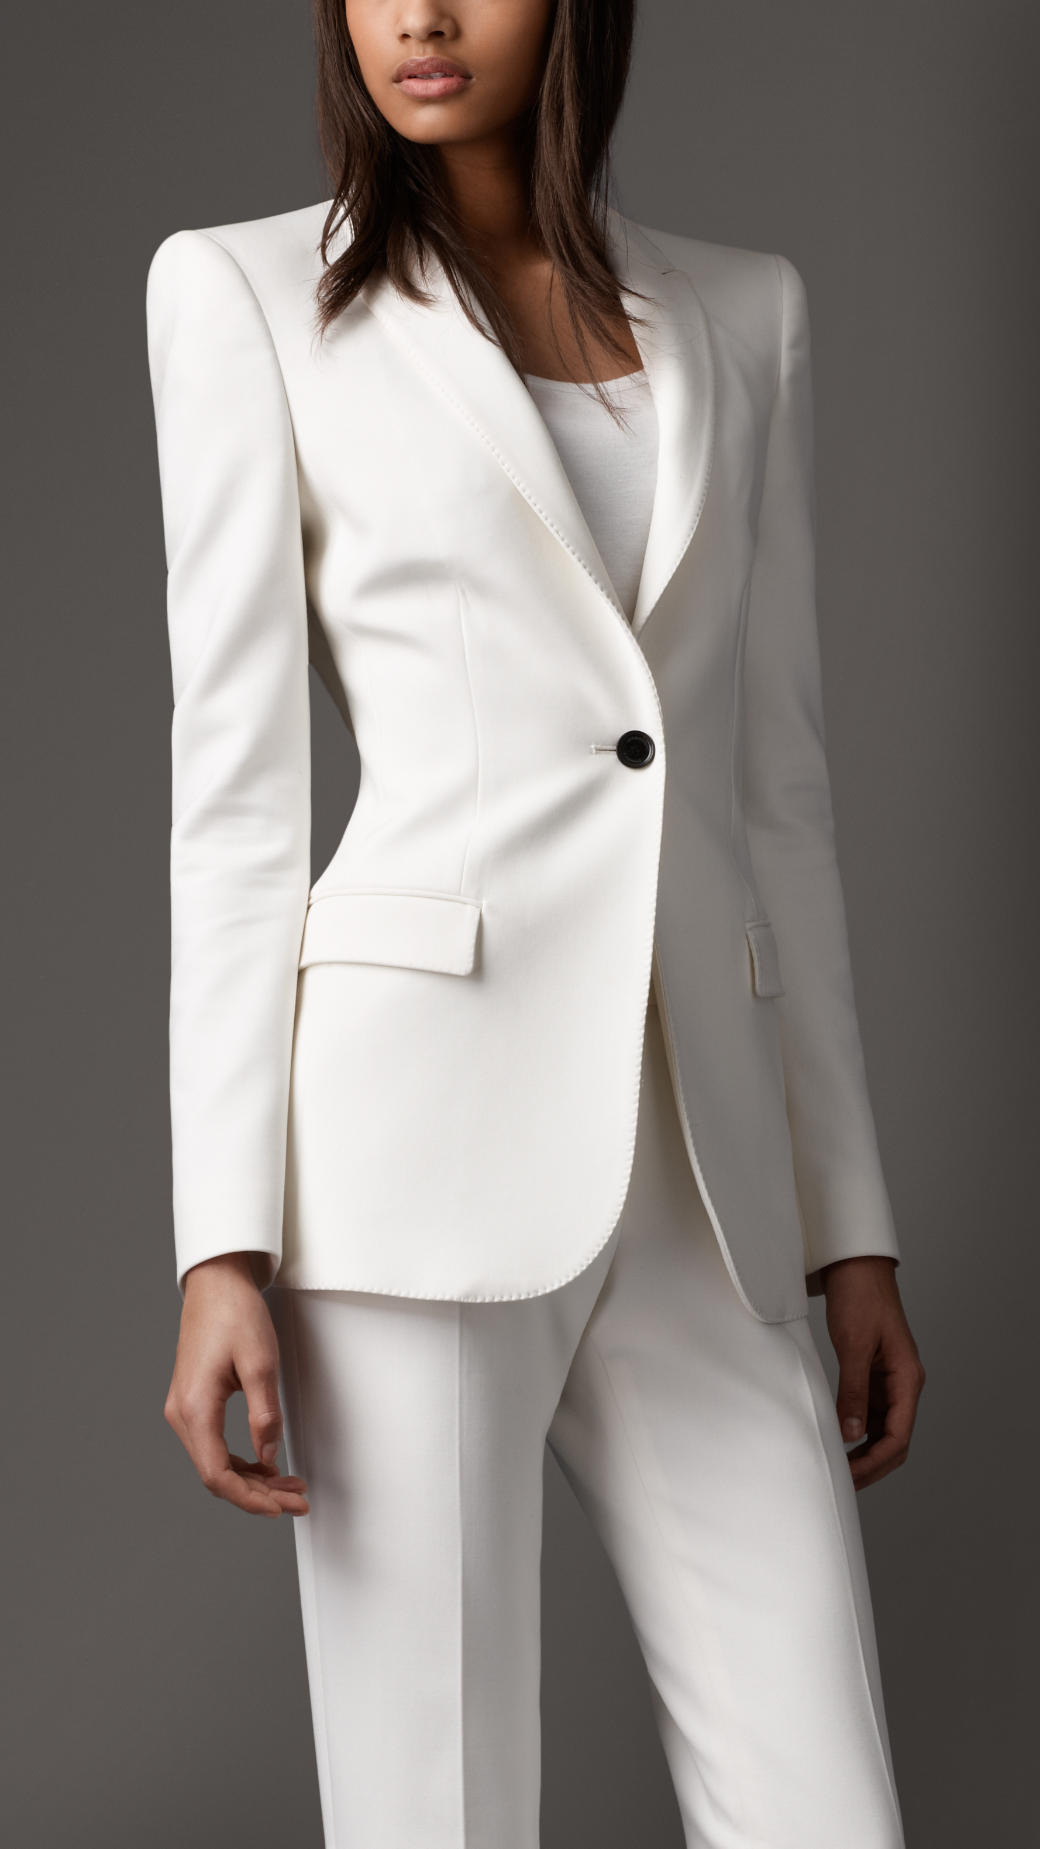 Lyst - Burberry Minimal Tailored Jacket in White